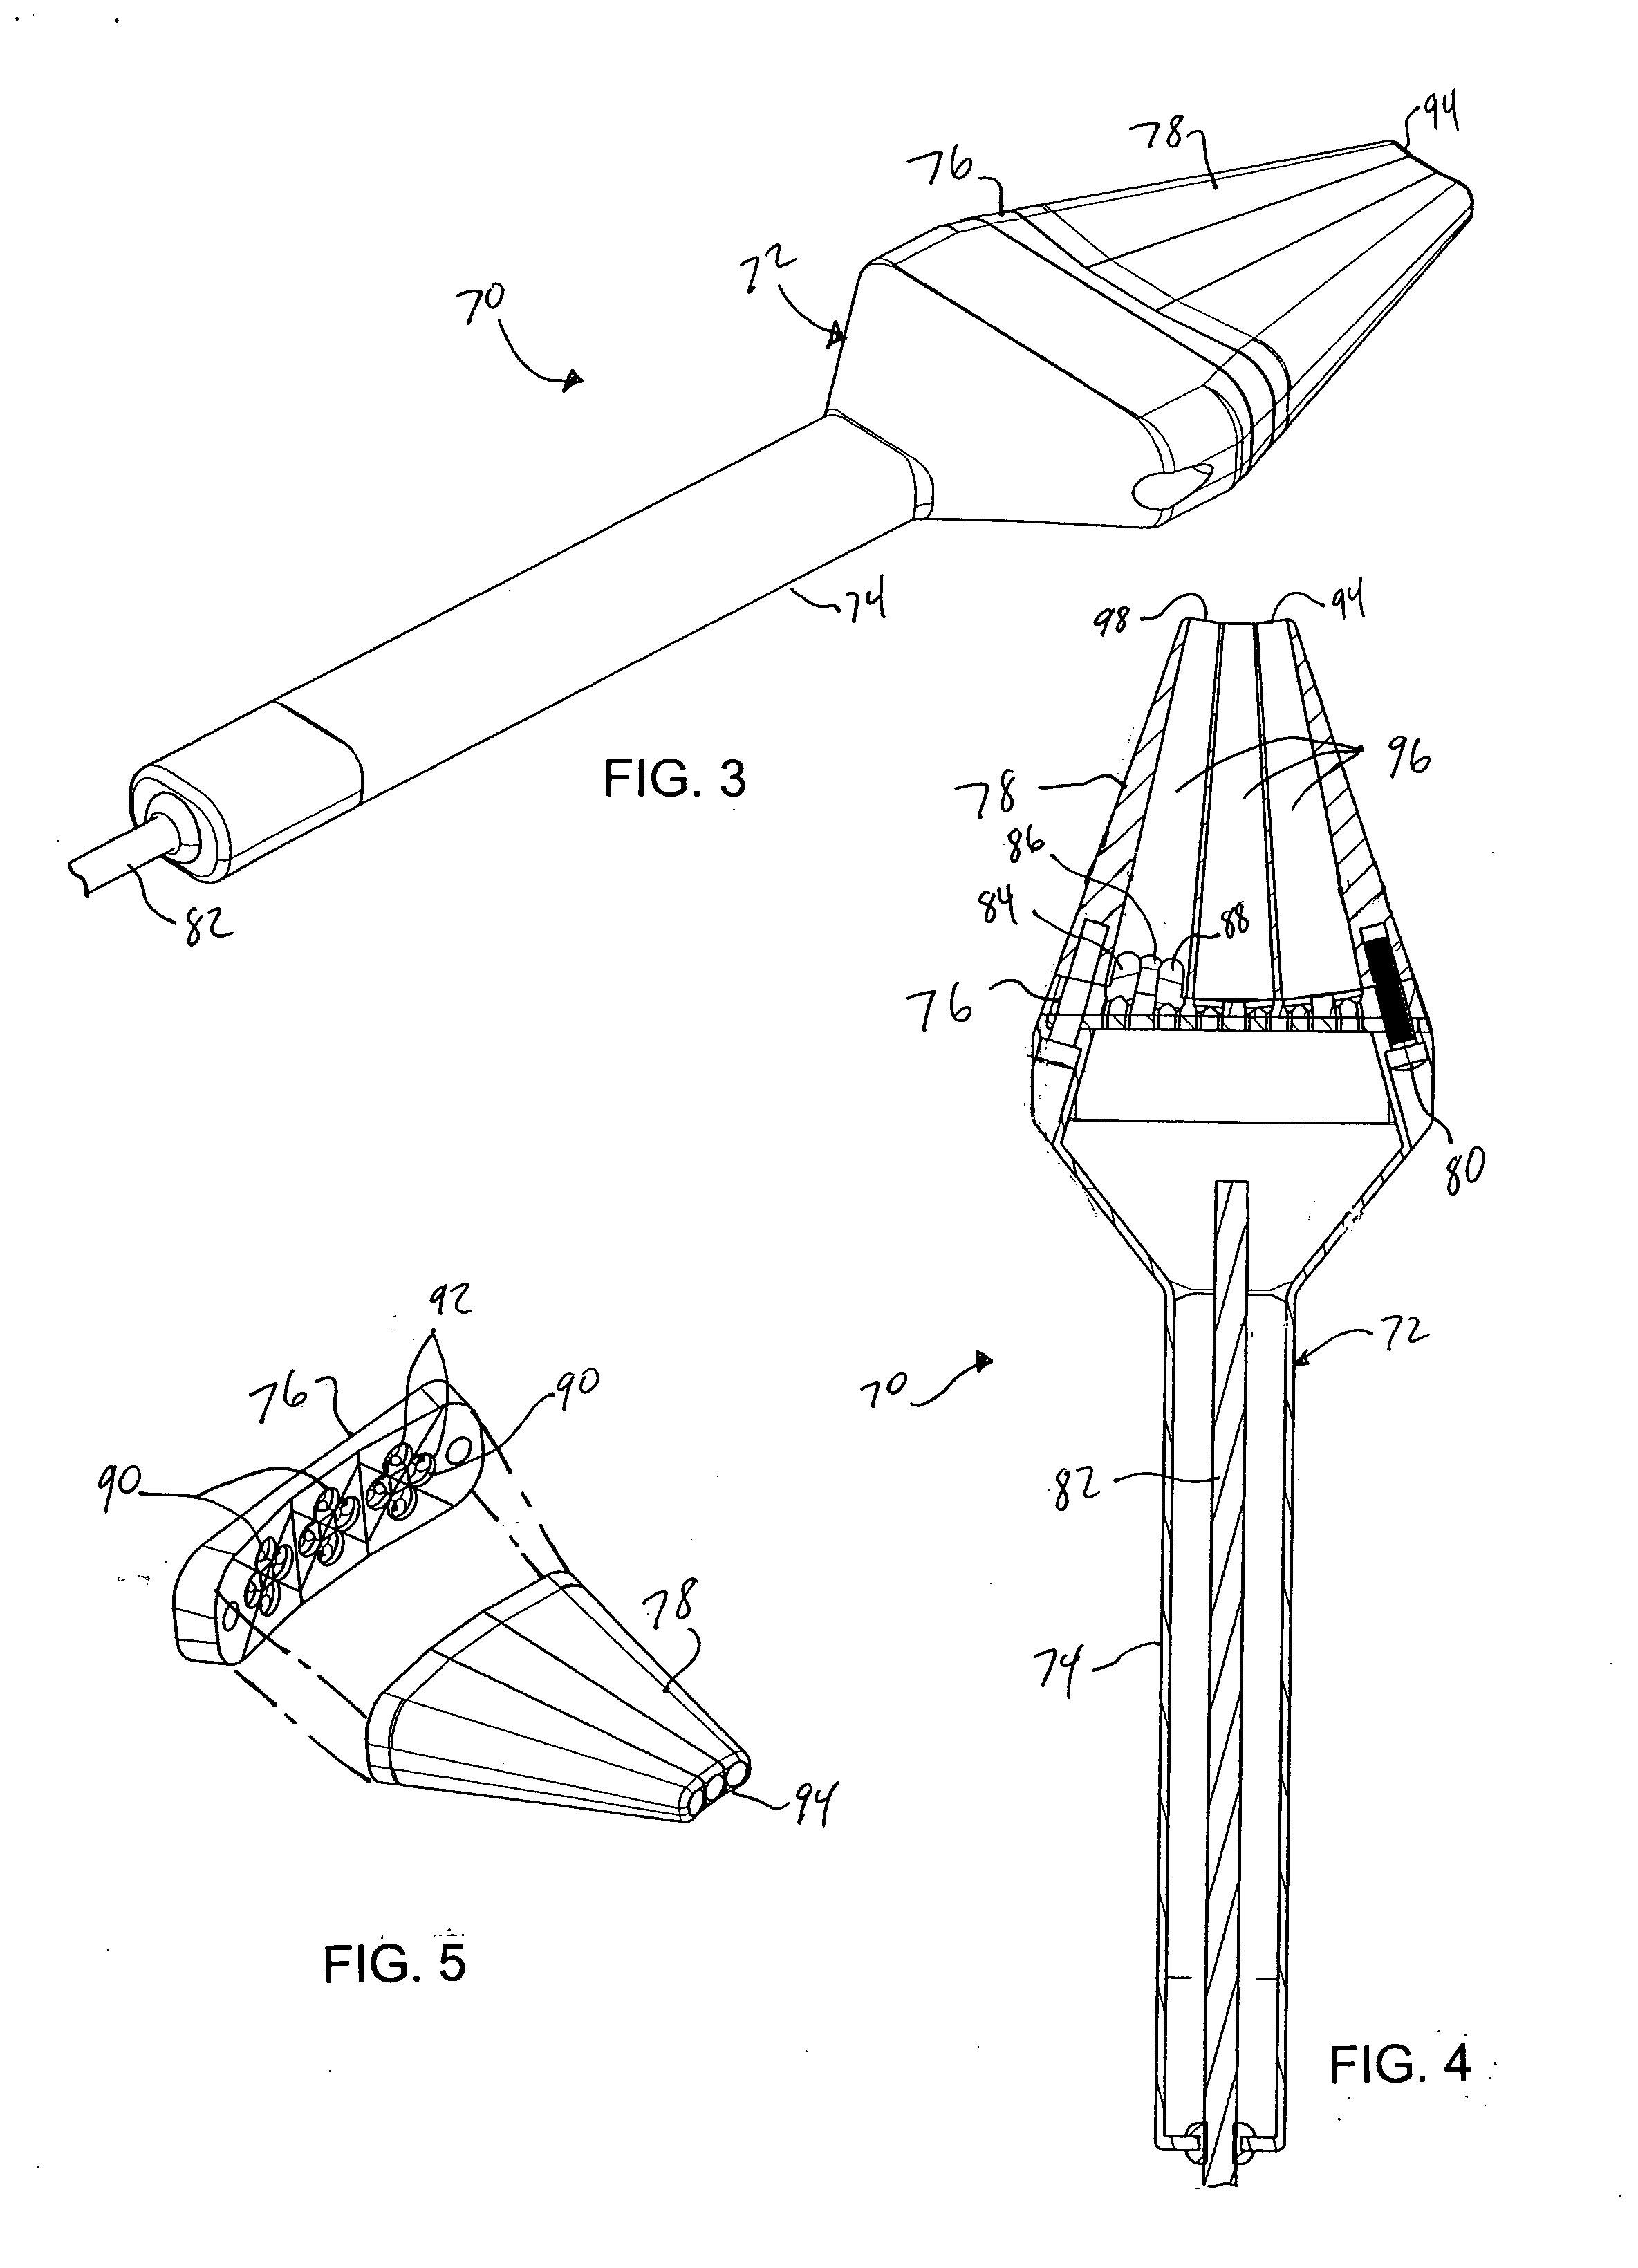 Method and apparatus for diagnosing conditions of the eye with infrared light